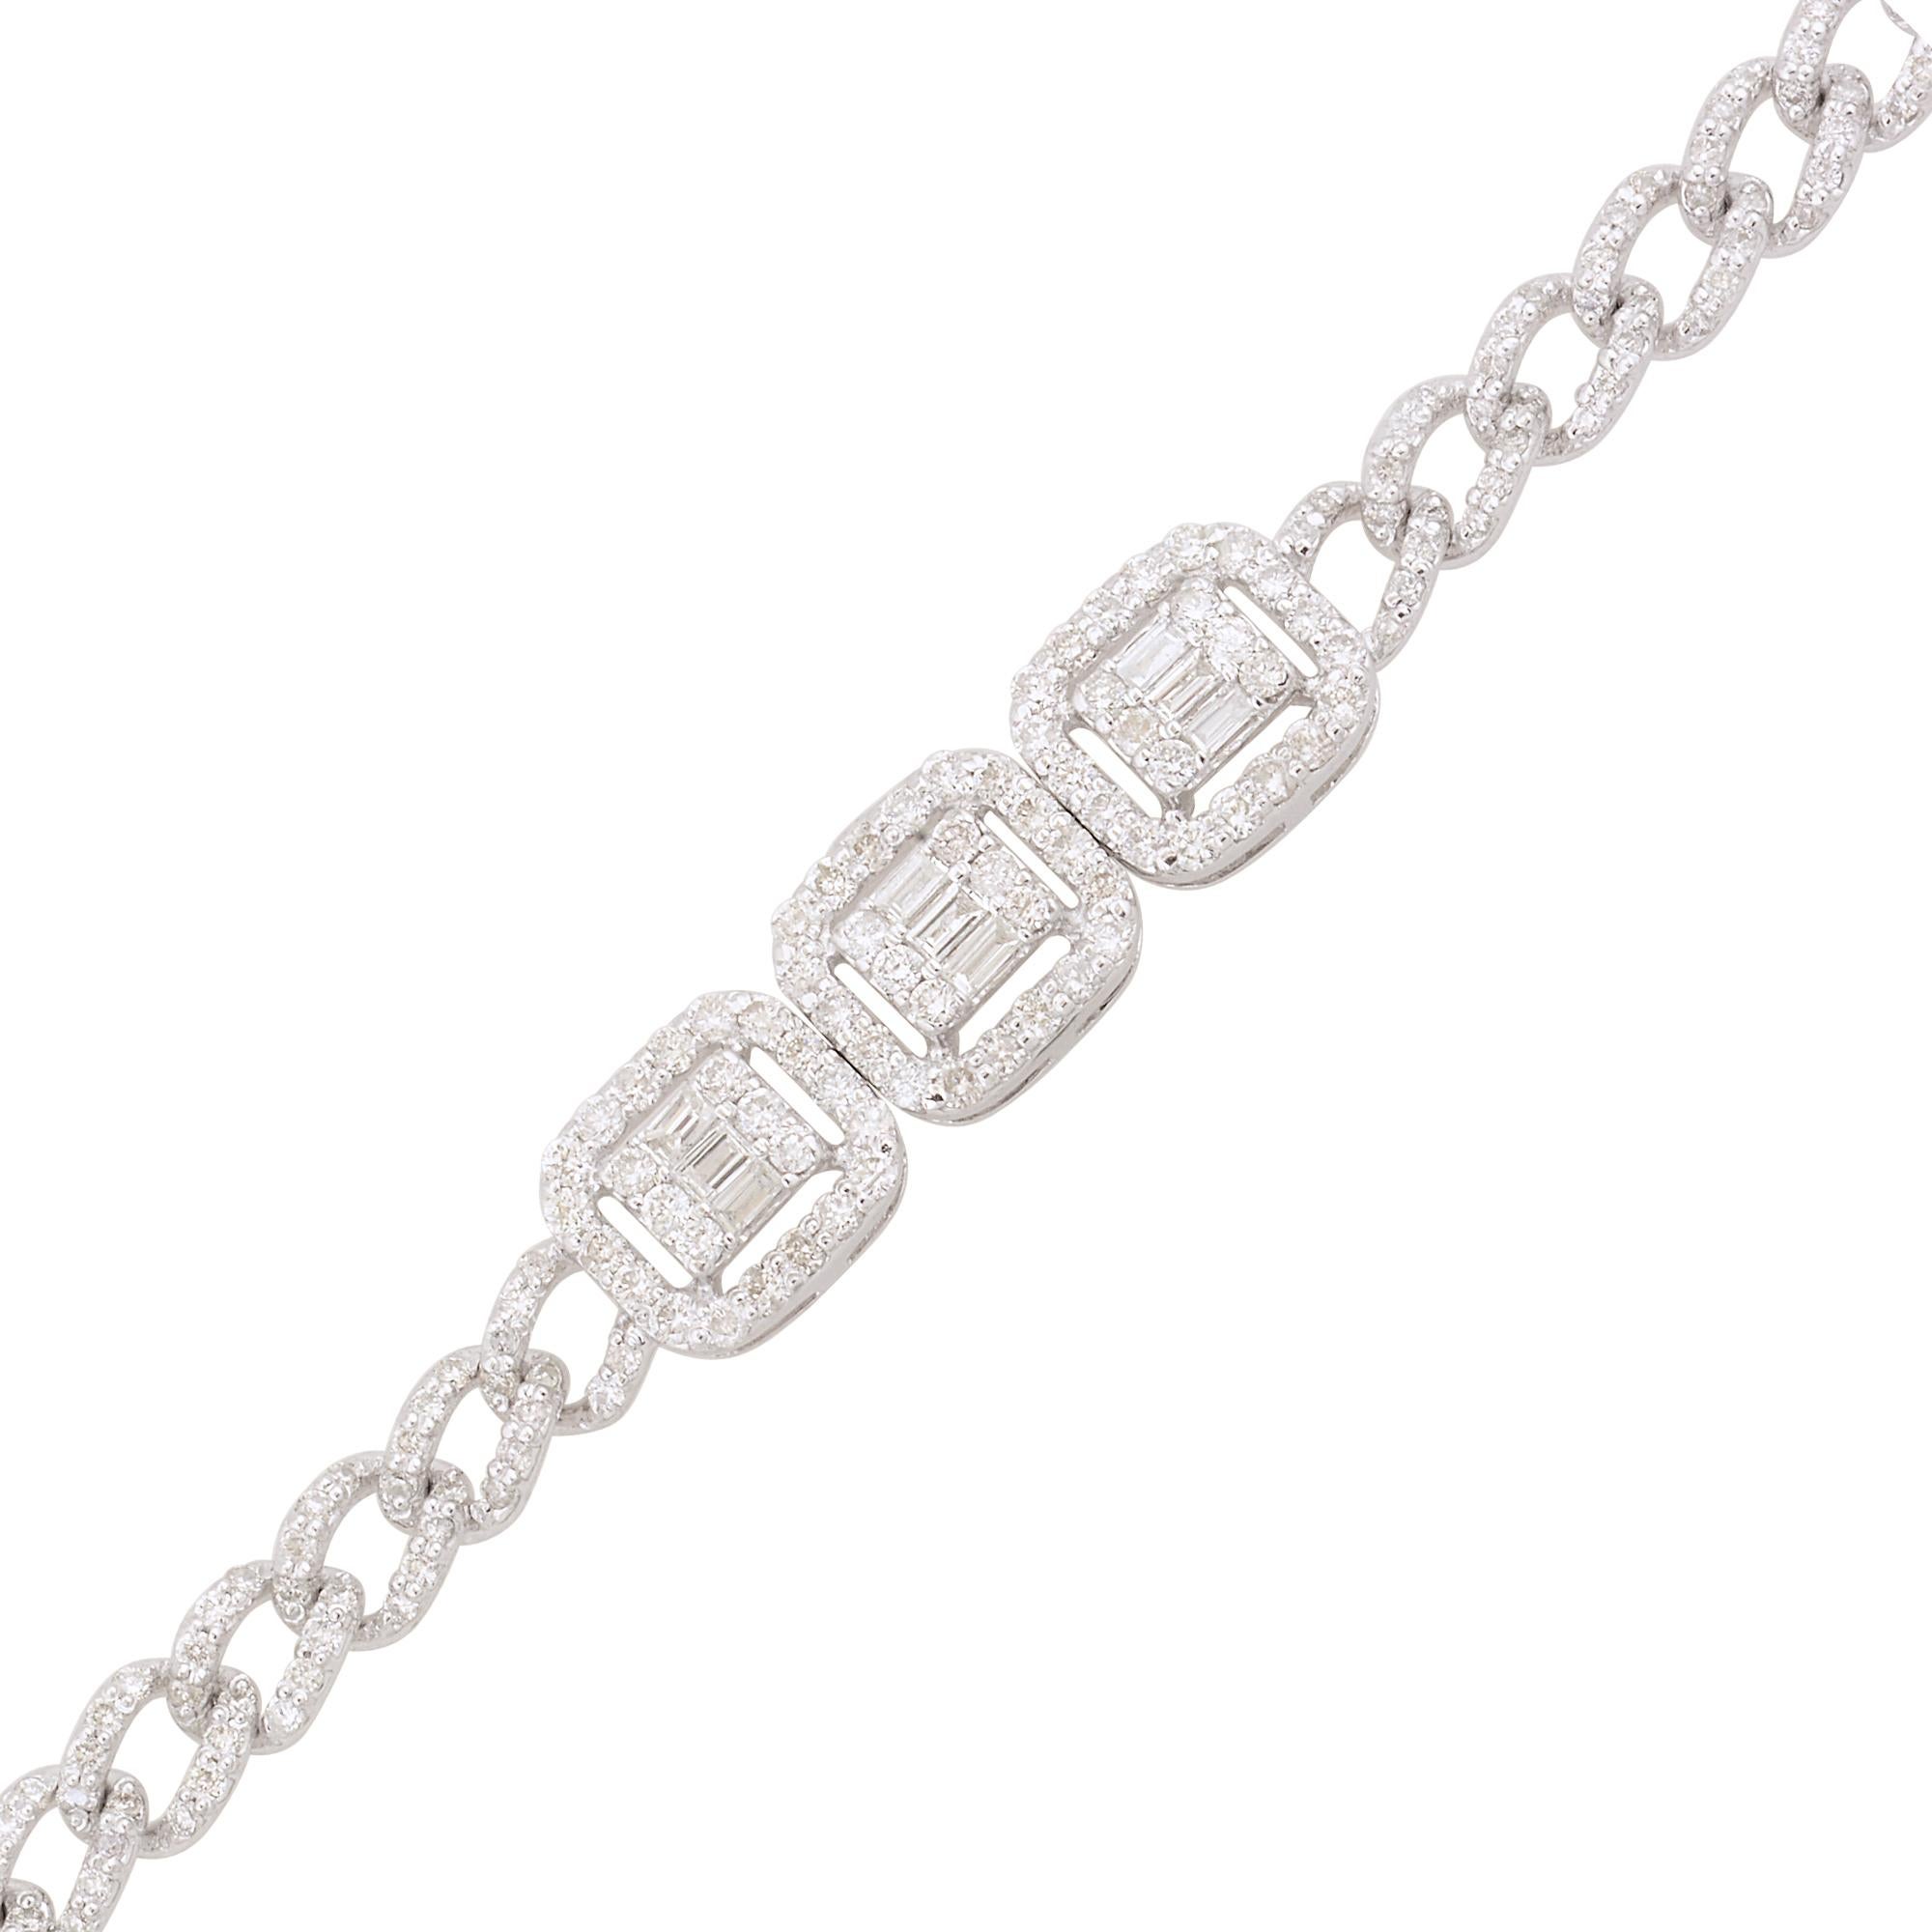 This diamond charm bracelet is a versatile piece that can be worn on various occasions, from casual outings to formal events. It adds a touch of glamour and sophistication to any ensemble and can be layered with other bracelets for a personalized